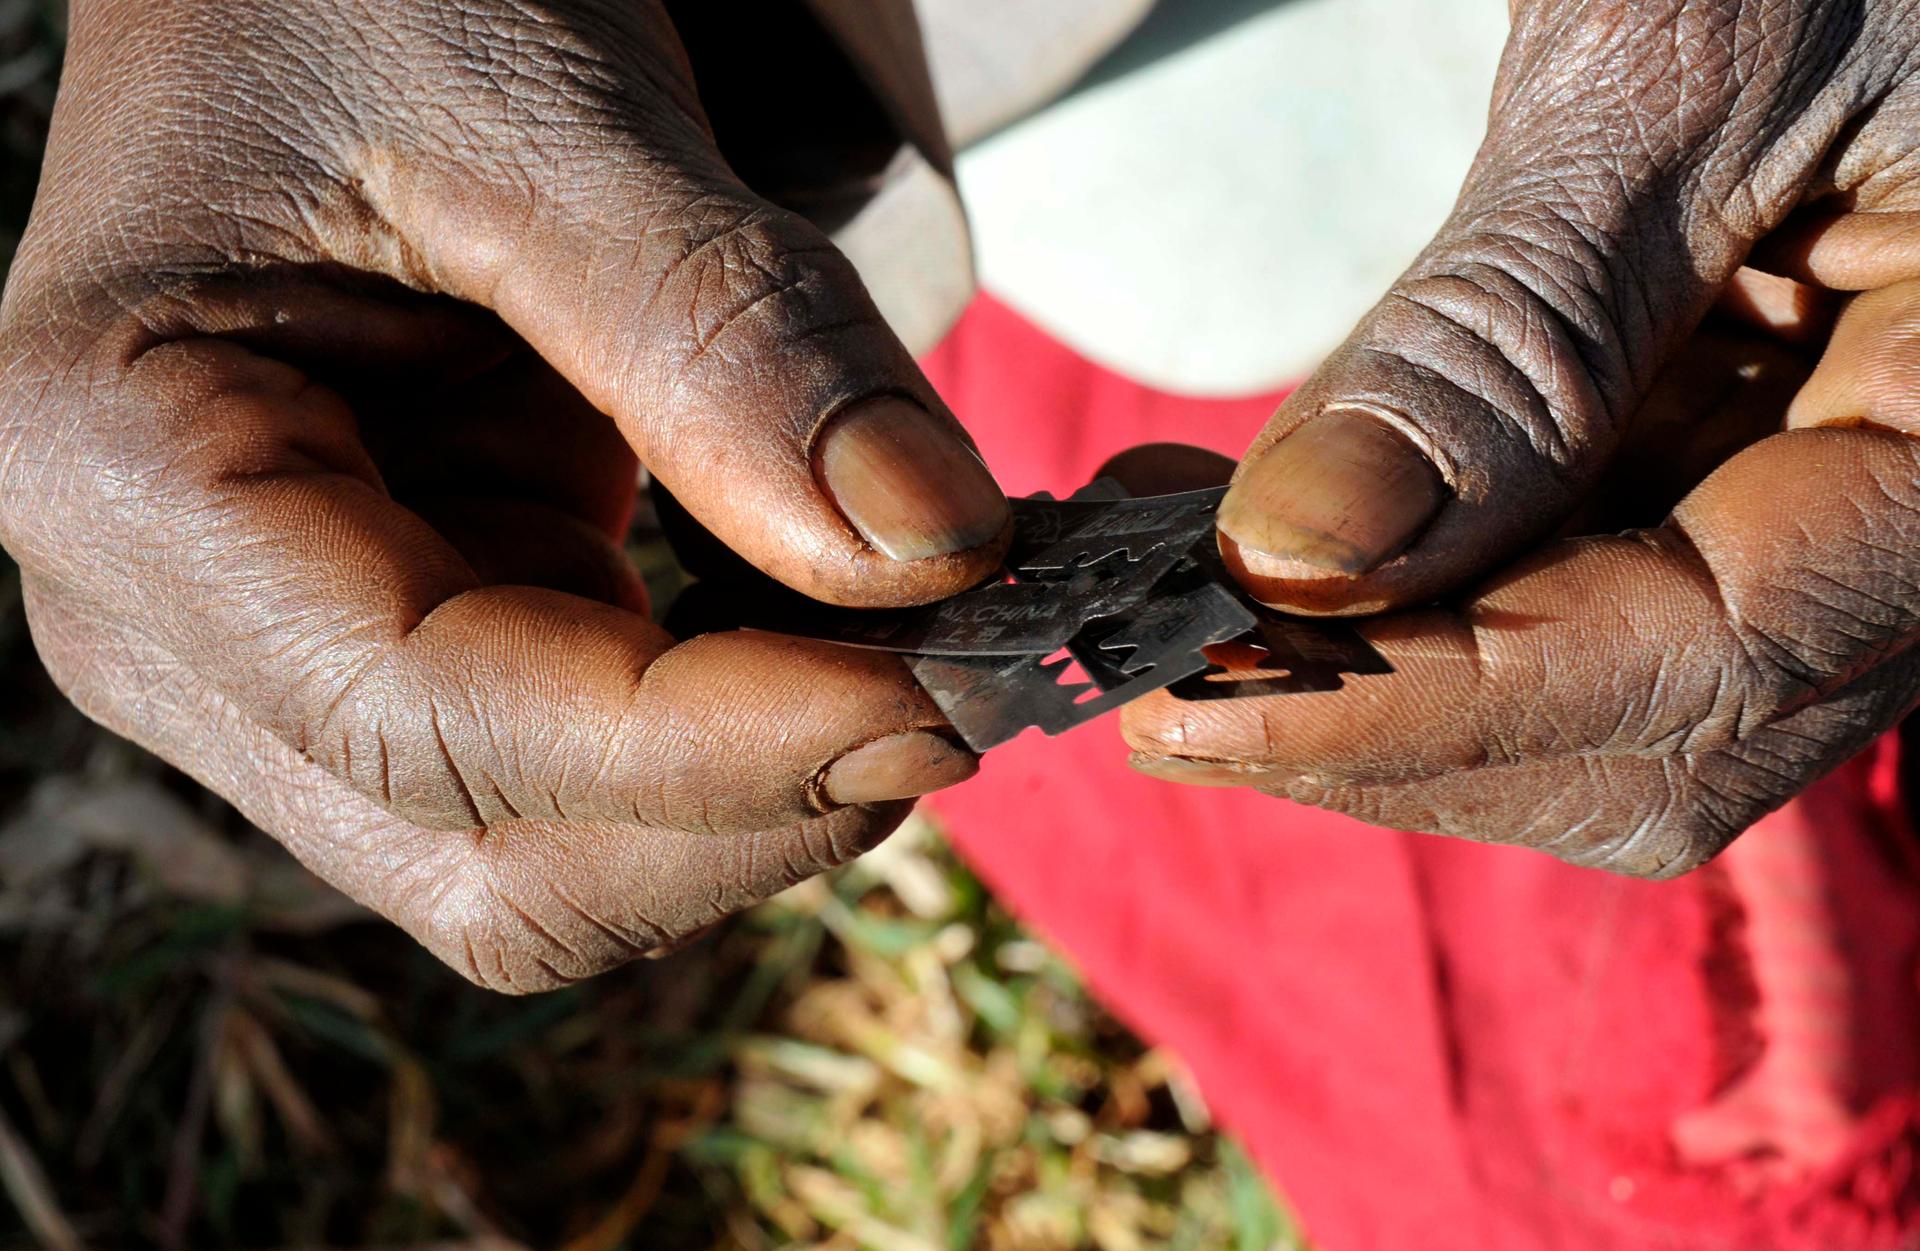 Prisca Korein, a 62-year-old traditional surgeon, holds razor blades before carrying out female genital mutilation on teenage girls from the Sebei tribe in Bukwa district, about 357 kms (214 miles) northeast of Kampala, December 15, 2008.